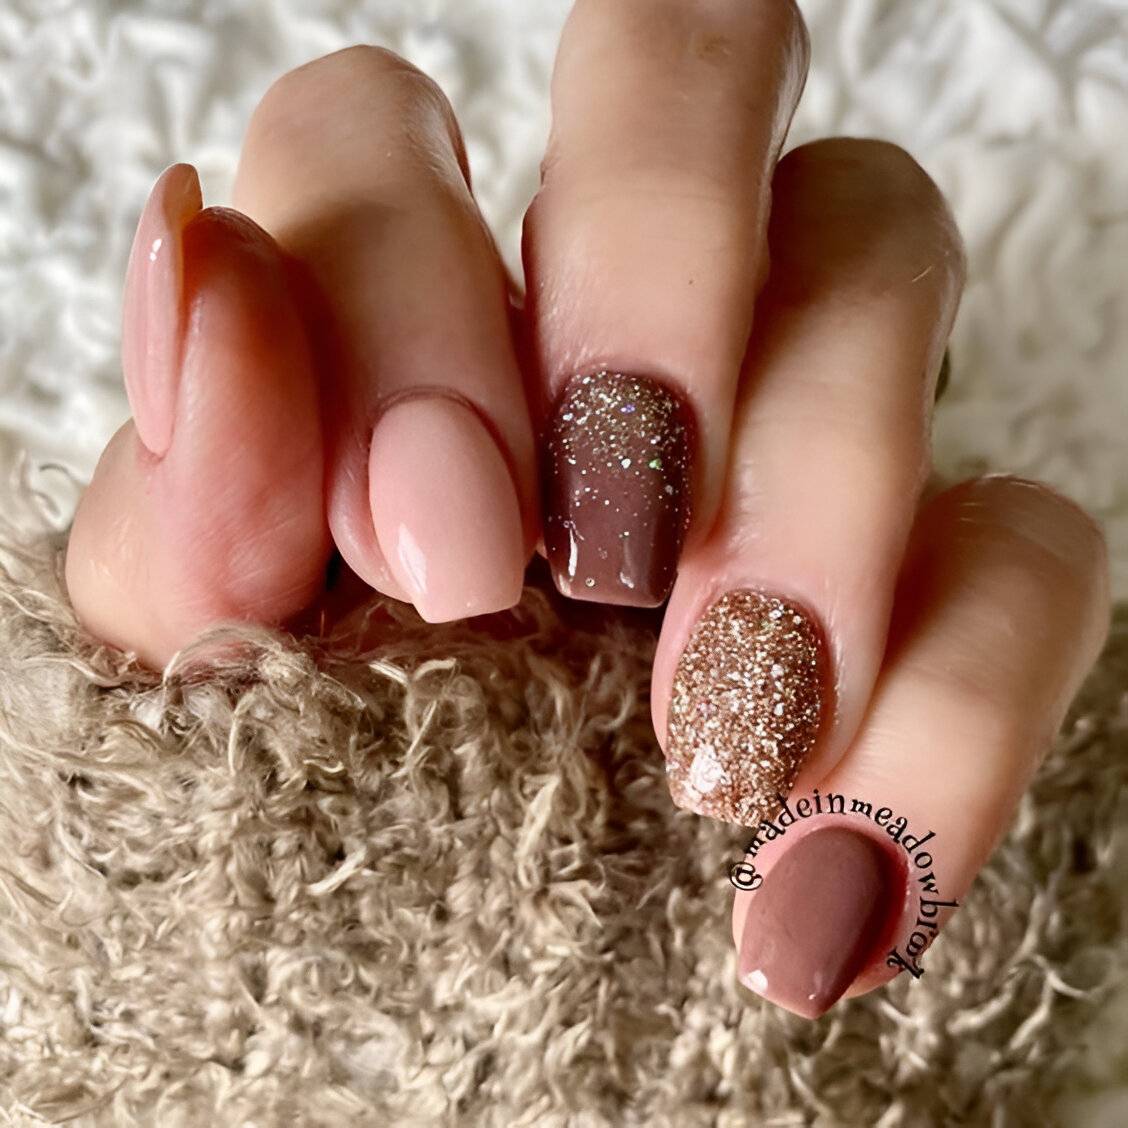 30 Autumn Nail Designs Too Chic To Resist - 205